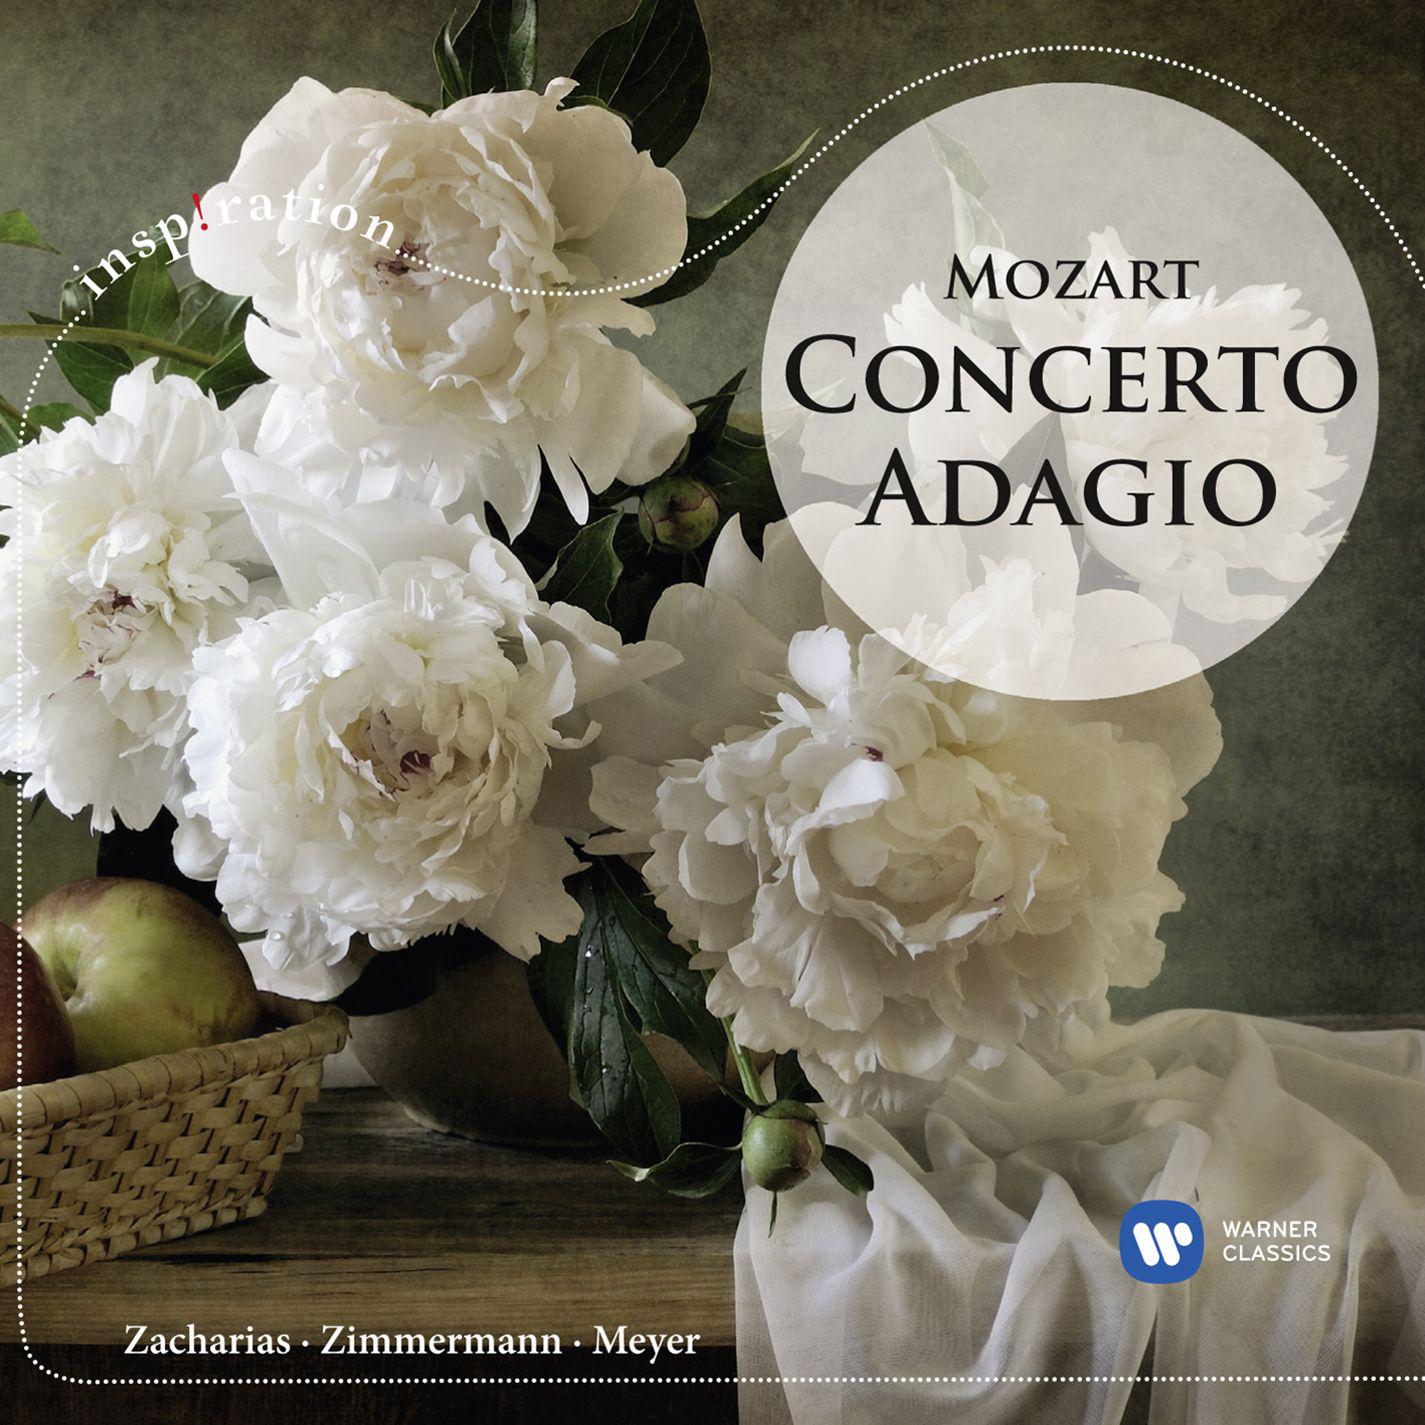 Sinfonia concertante for Oboe, Clarinet, Horn and Bassoon in E-Flat Major, K. 297b:II. Adagio